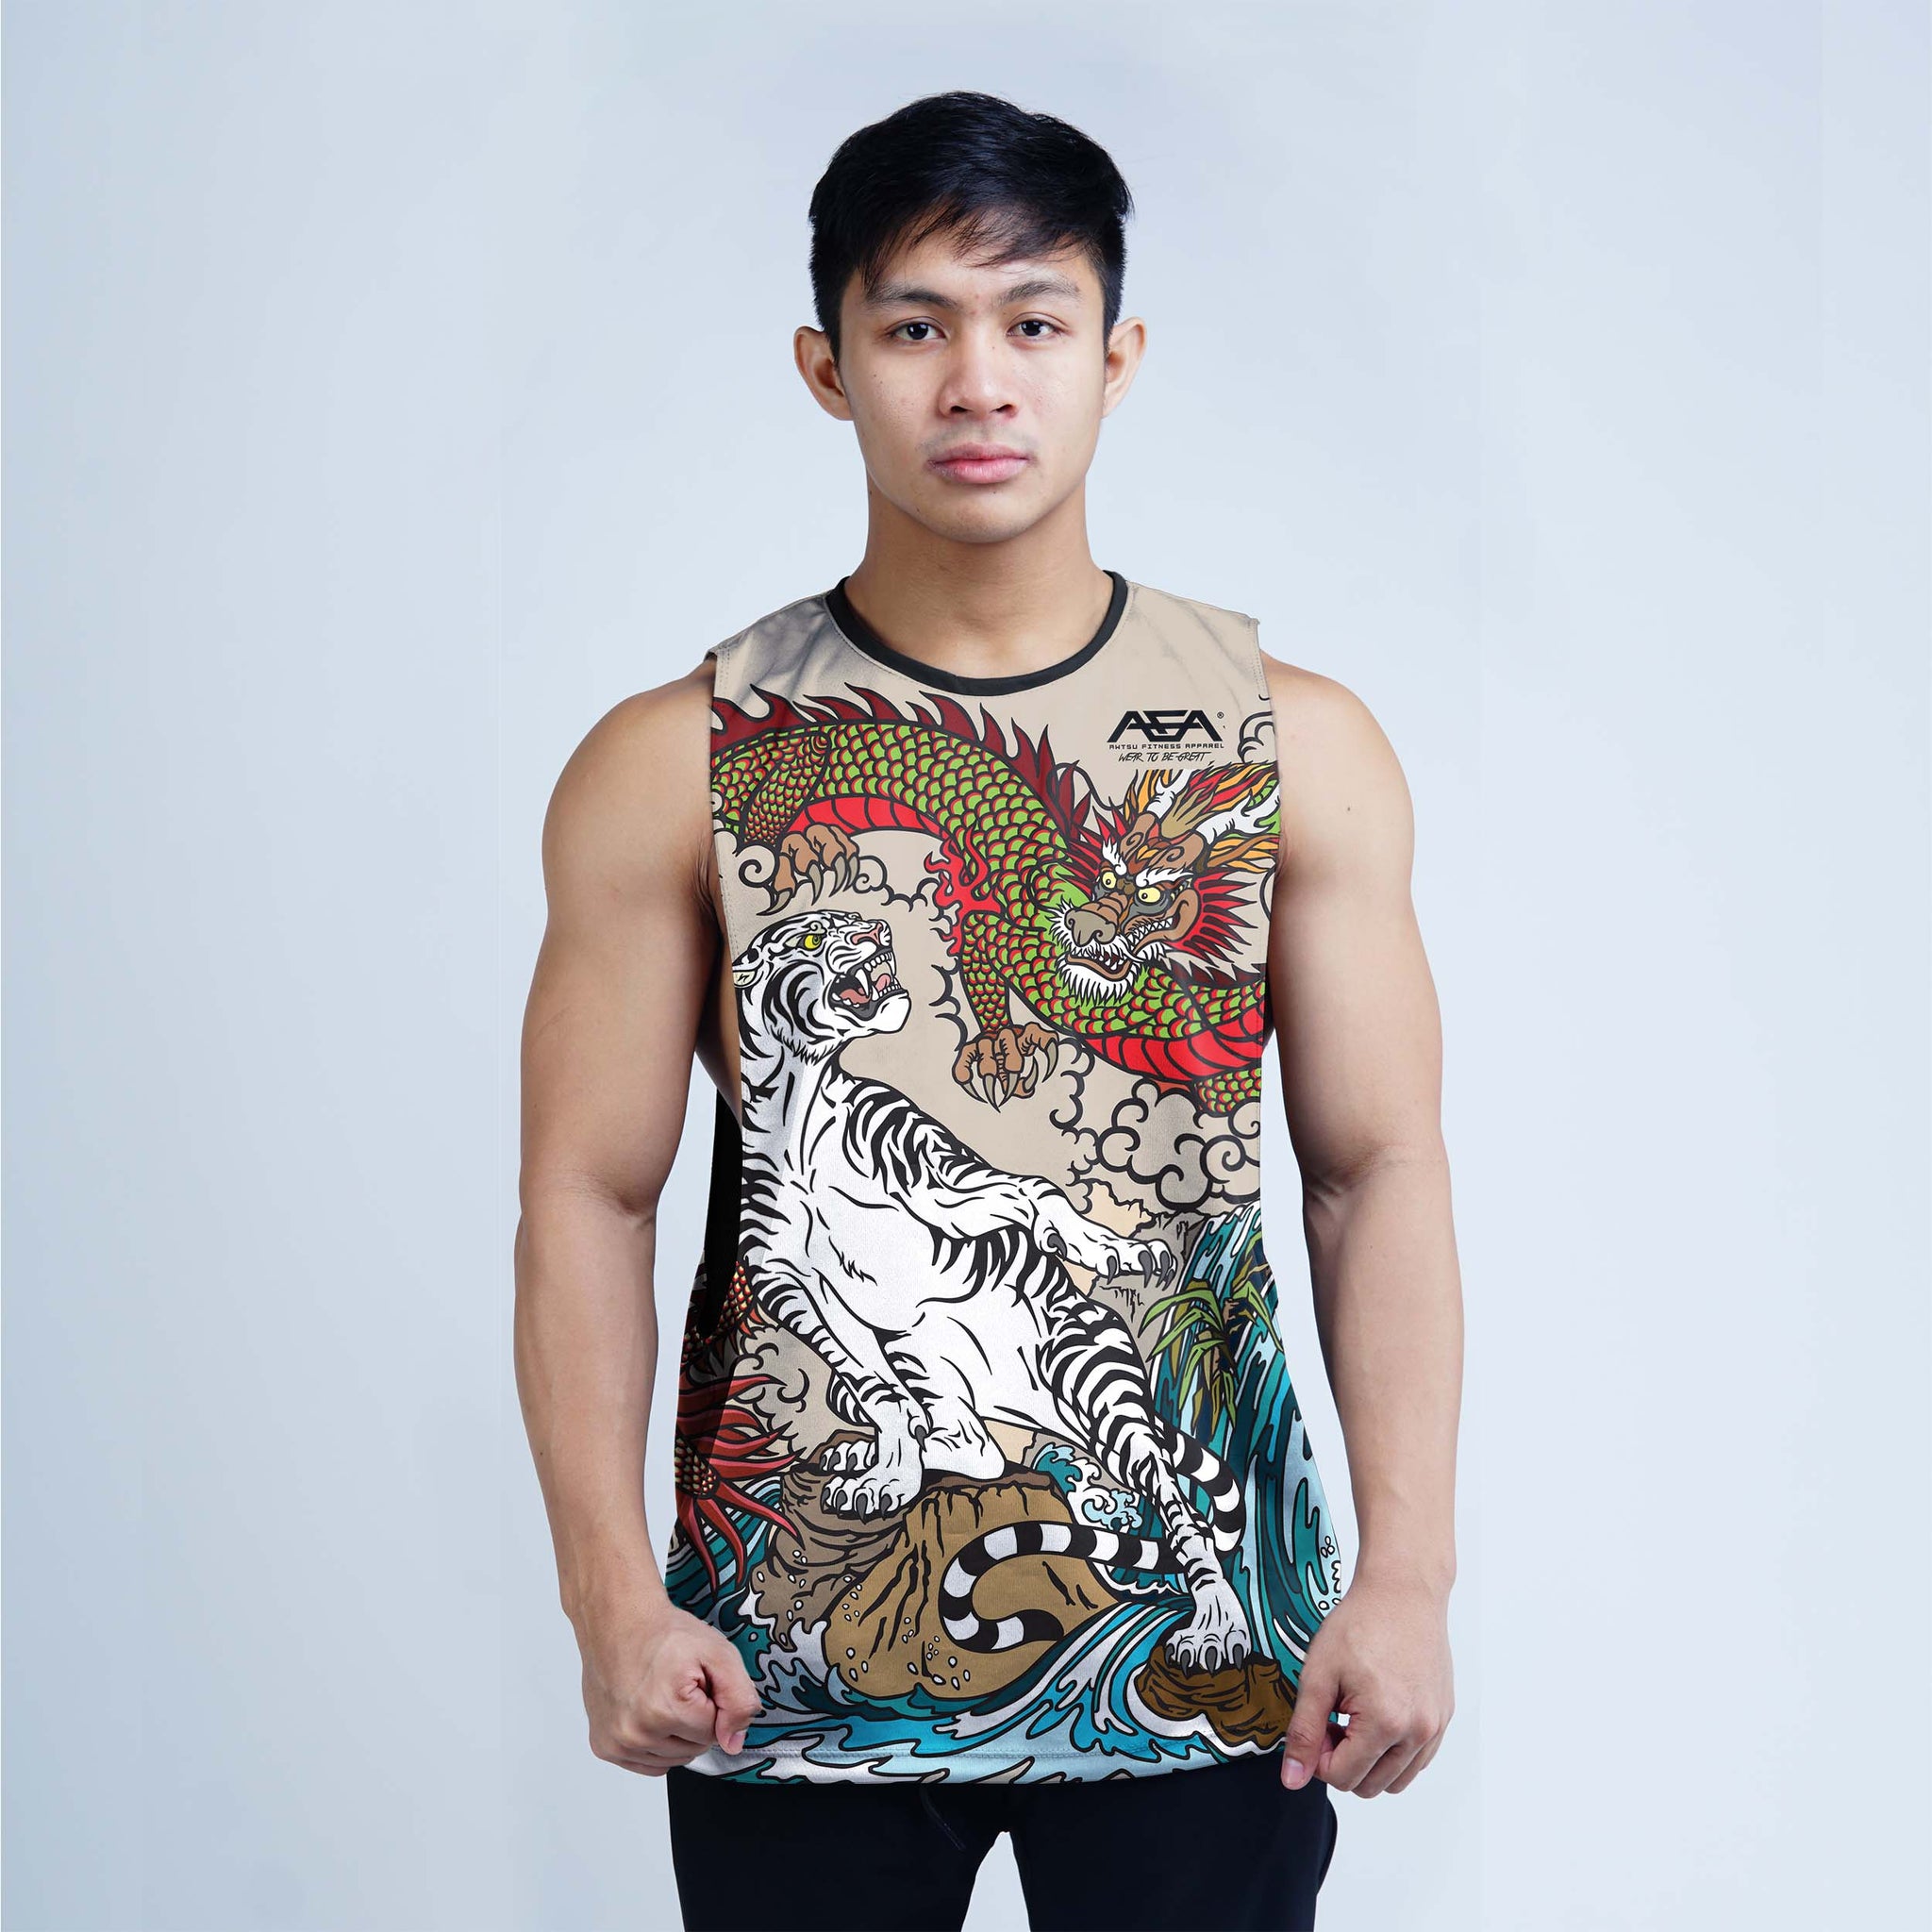 Of The Tiger Dragon VS White Tiger Sublimation Openside Tank